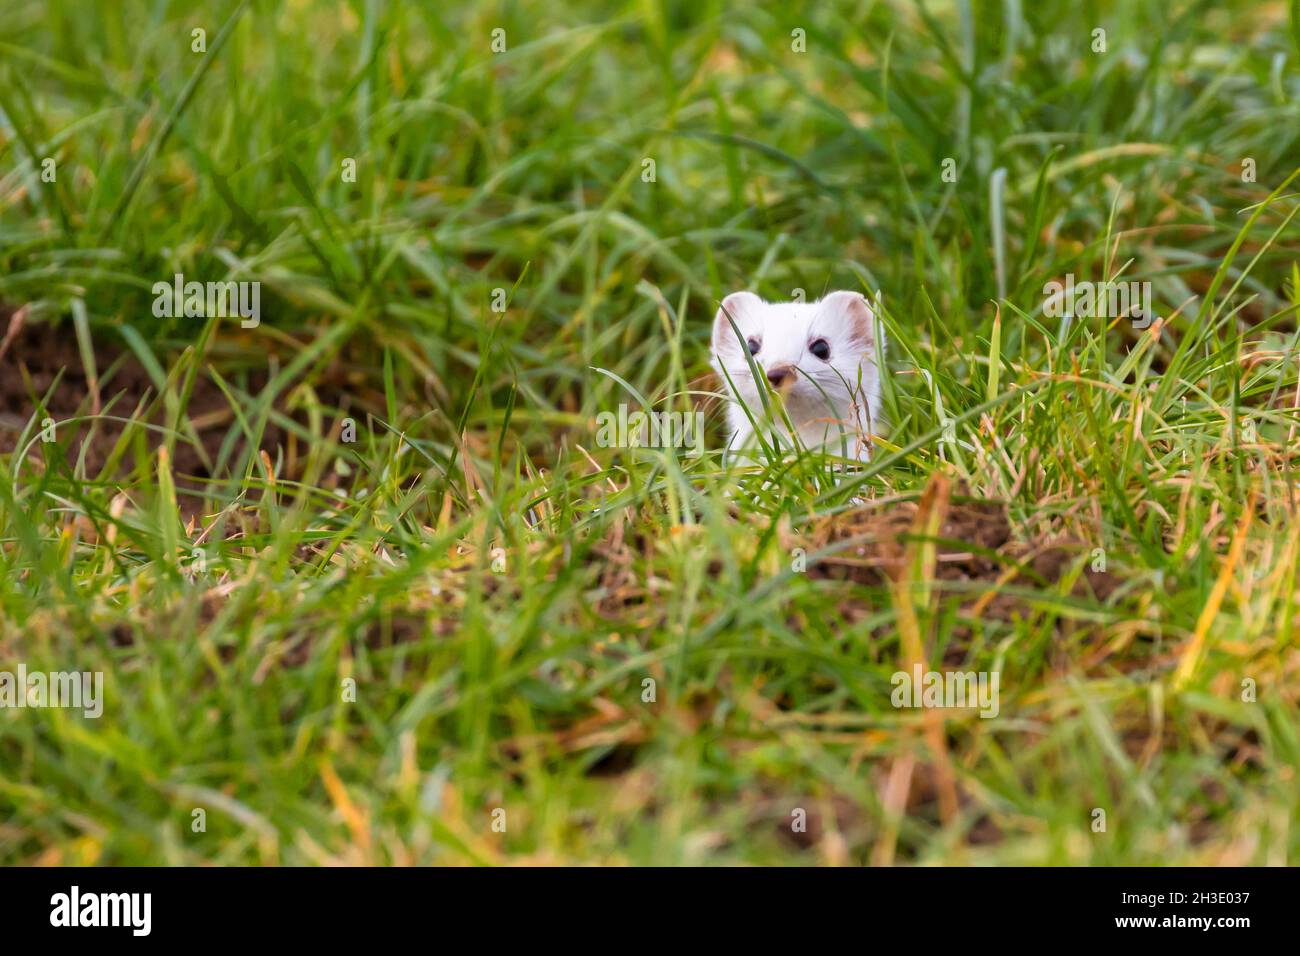 Ermine, Stoat, Short-tailed weasel (Mustela erminea), looking out of a hollow in a meadow, winter coat, Germany Stock Photo